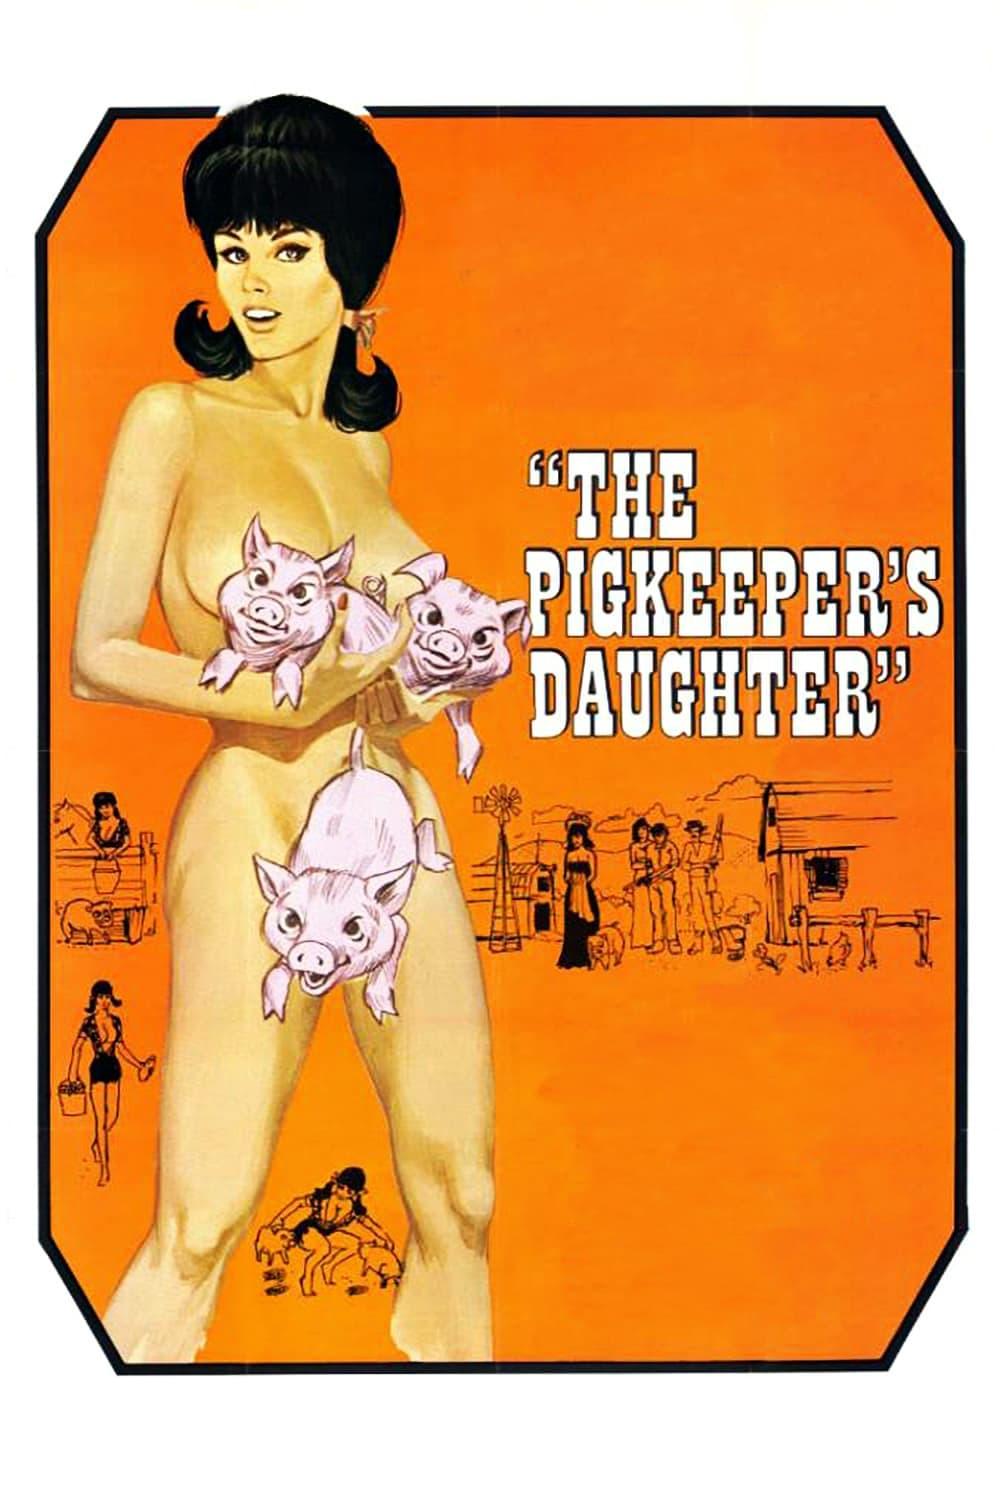 The Pig Keeper's Daughter poster